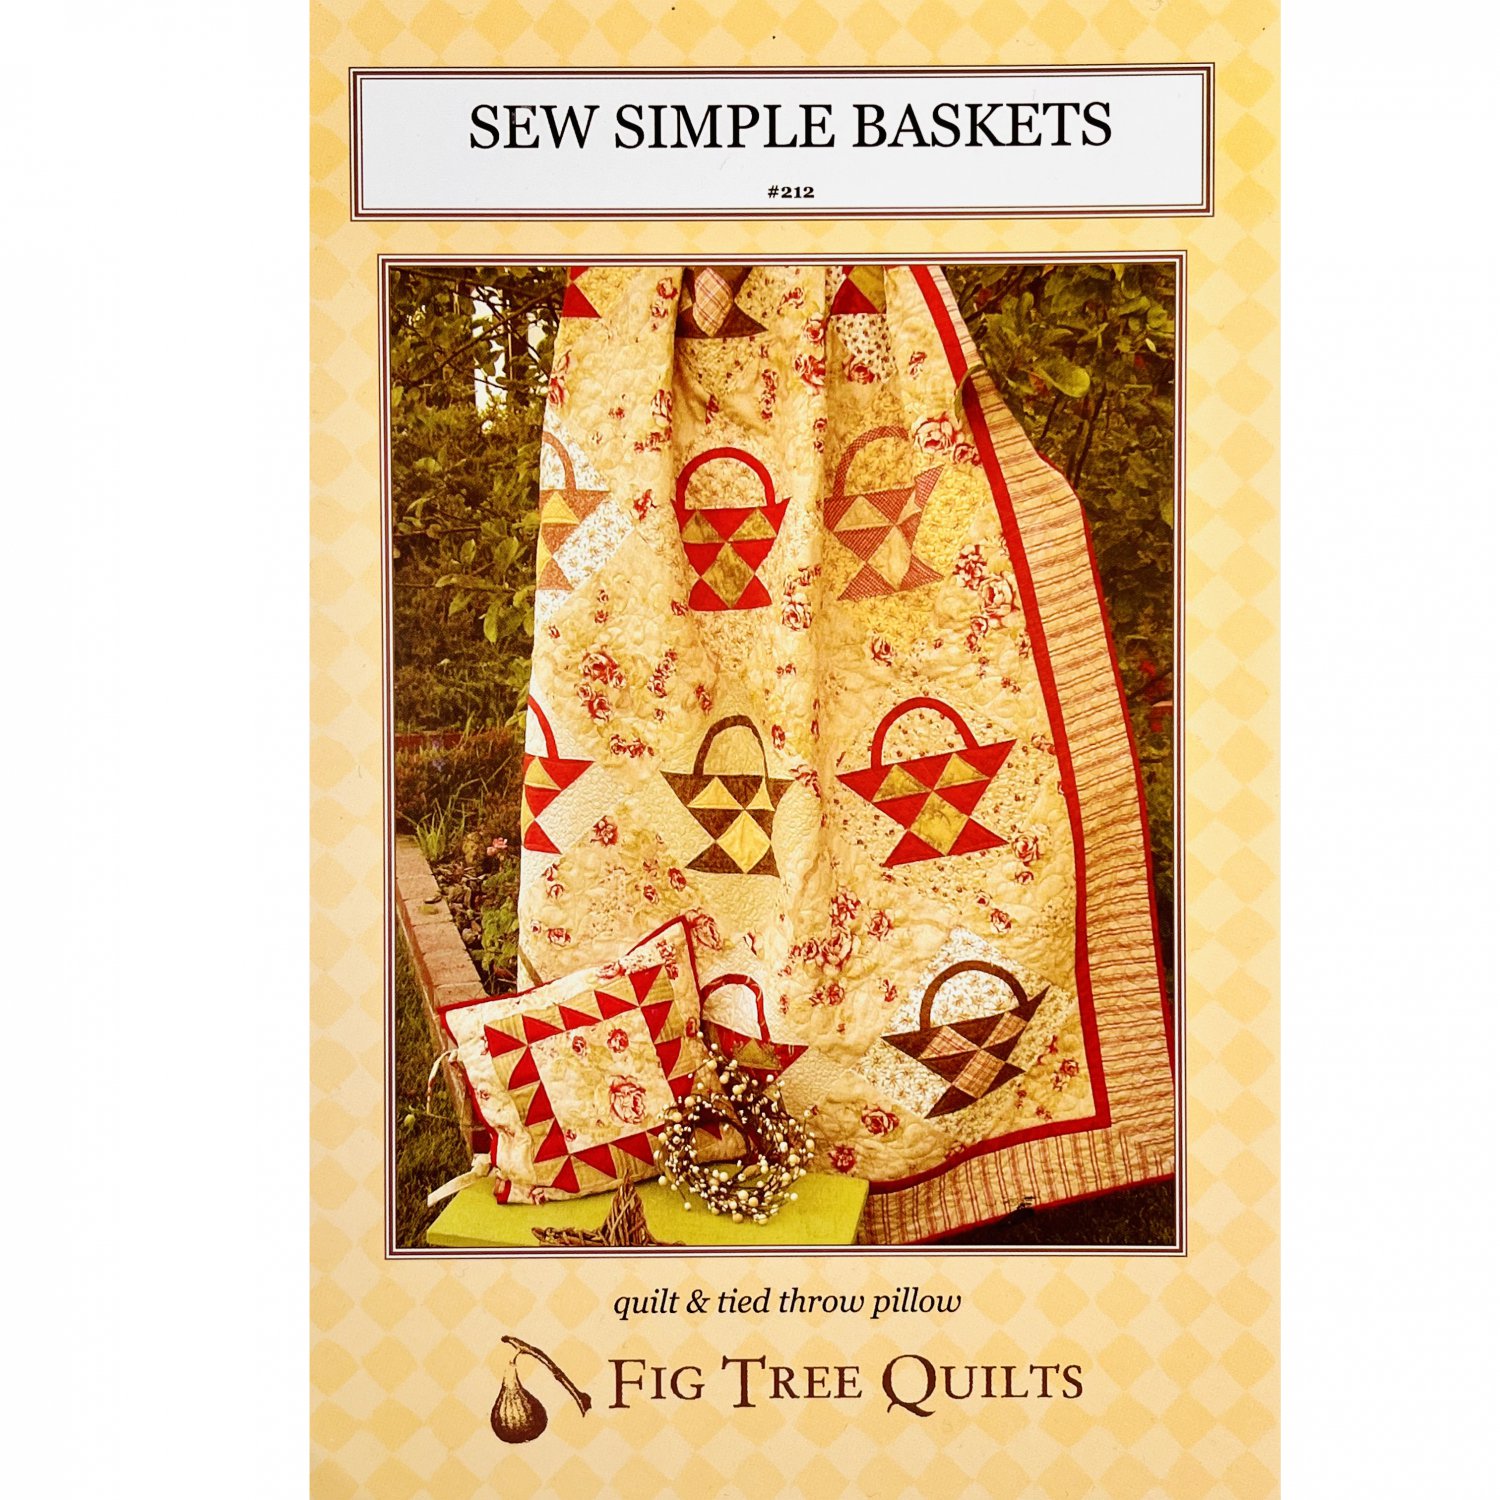 Sew Simple Baskets Quilt Pattern #212 by Fig Tree Quilts, Makes Quilt and Tied Throw Pillow